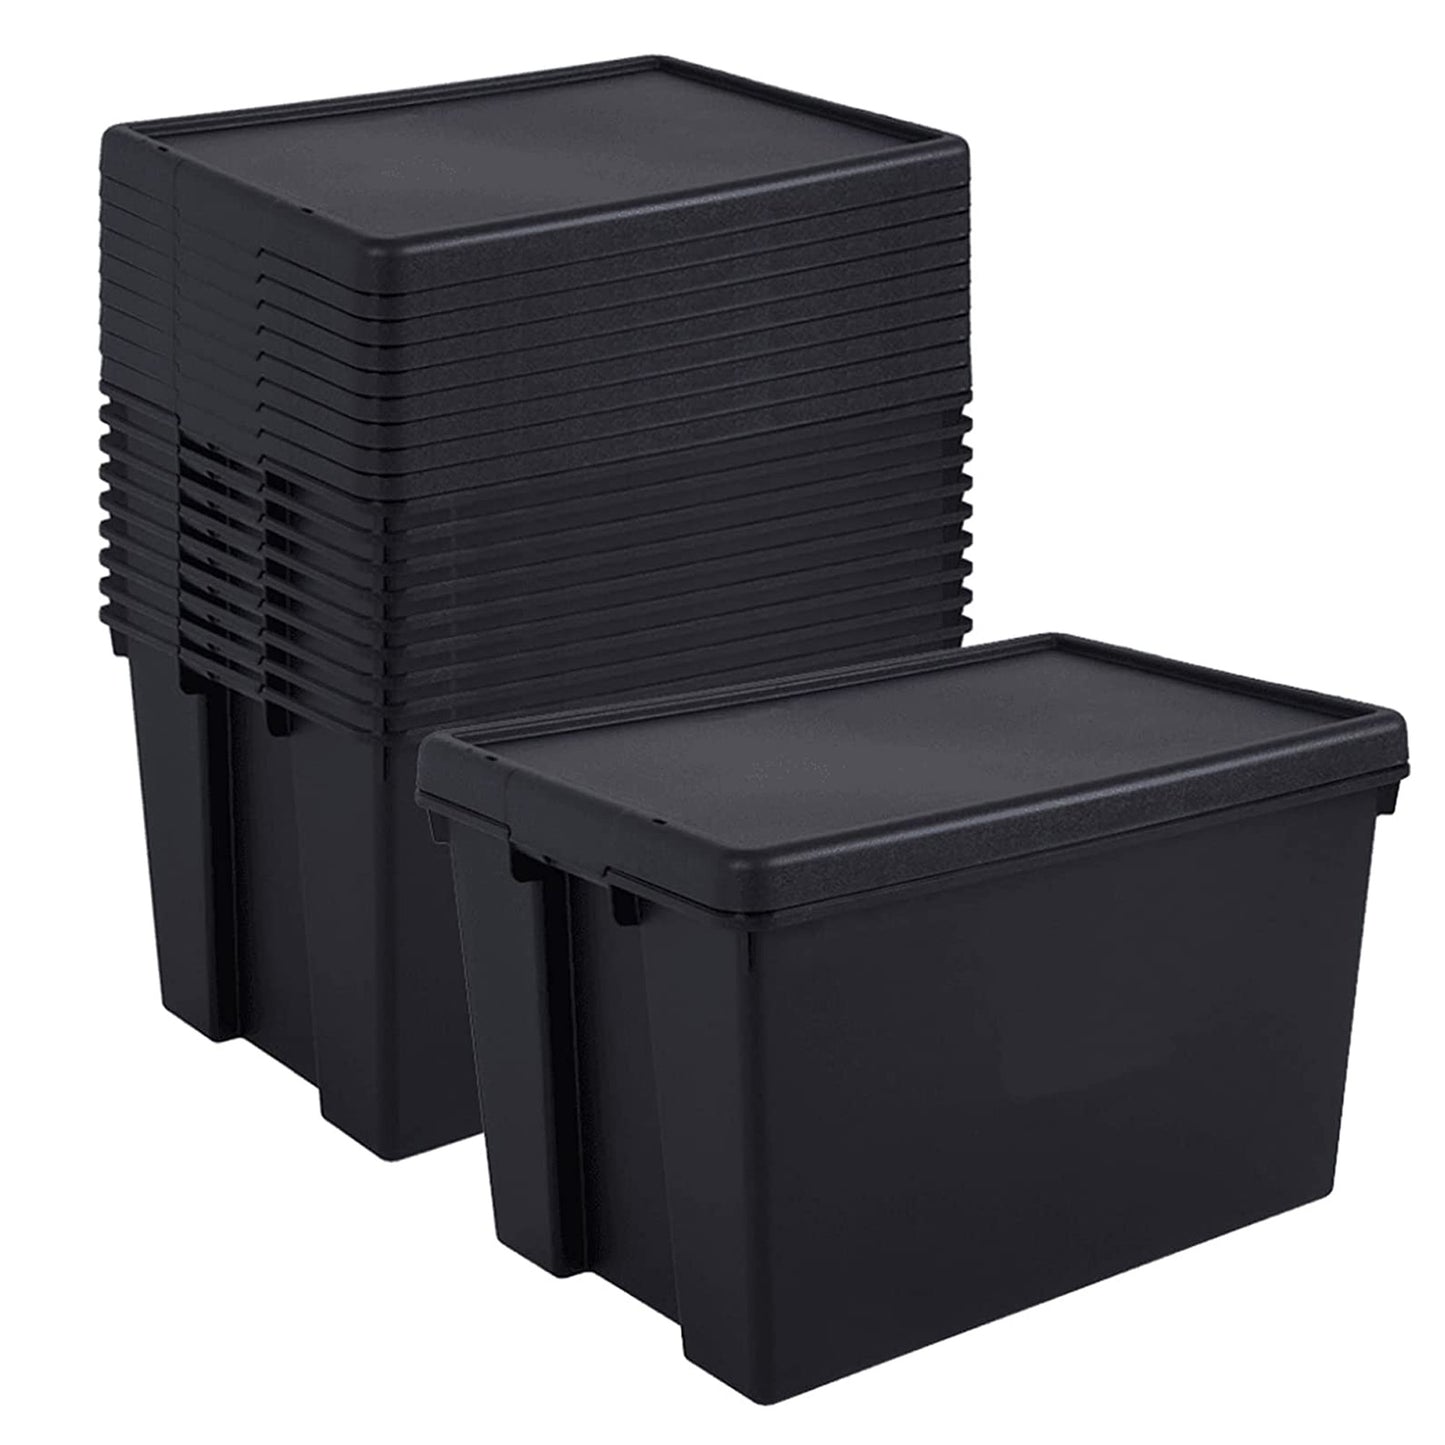 Extra Large Super Strong Stackable & Nestable Black Impact Resistant Containers With Lids